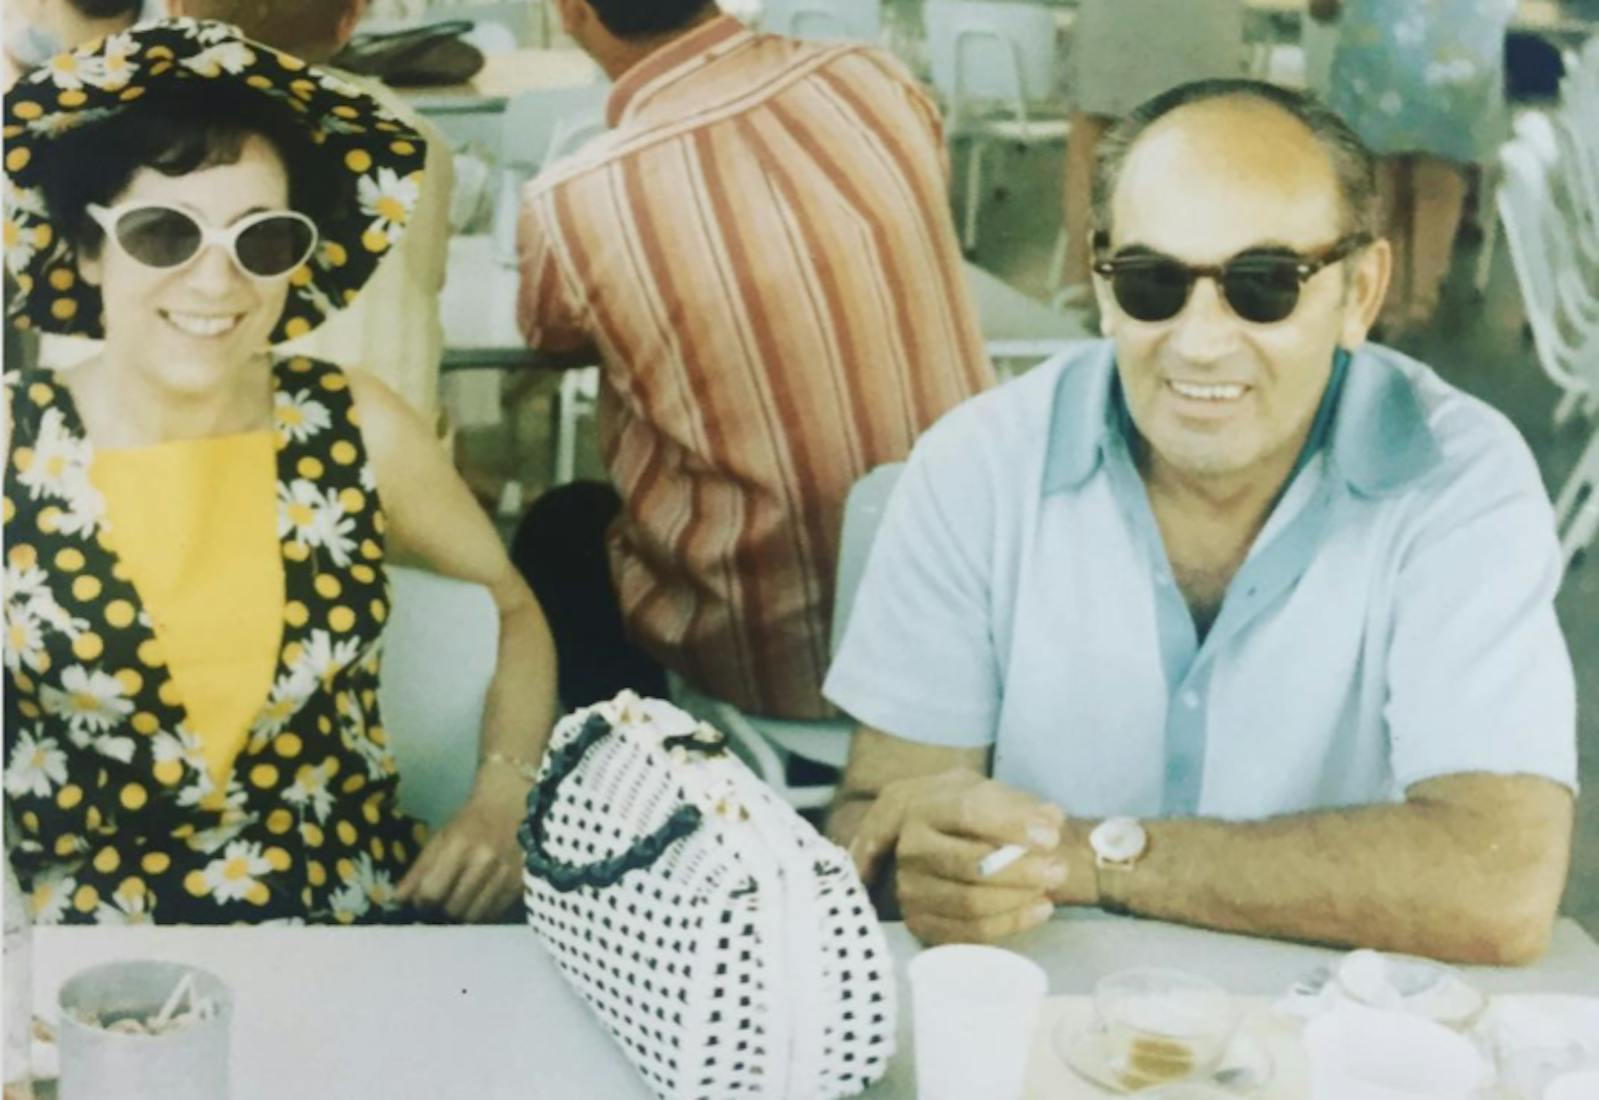 Inge (left) with her husband in Israel in the 1970s.